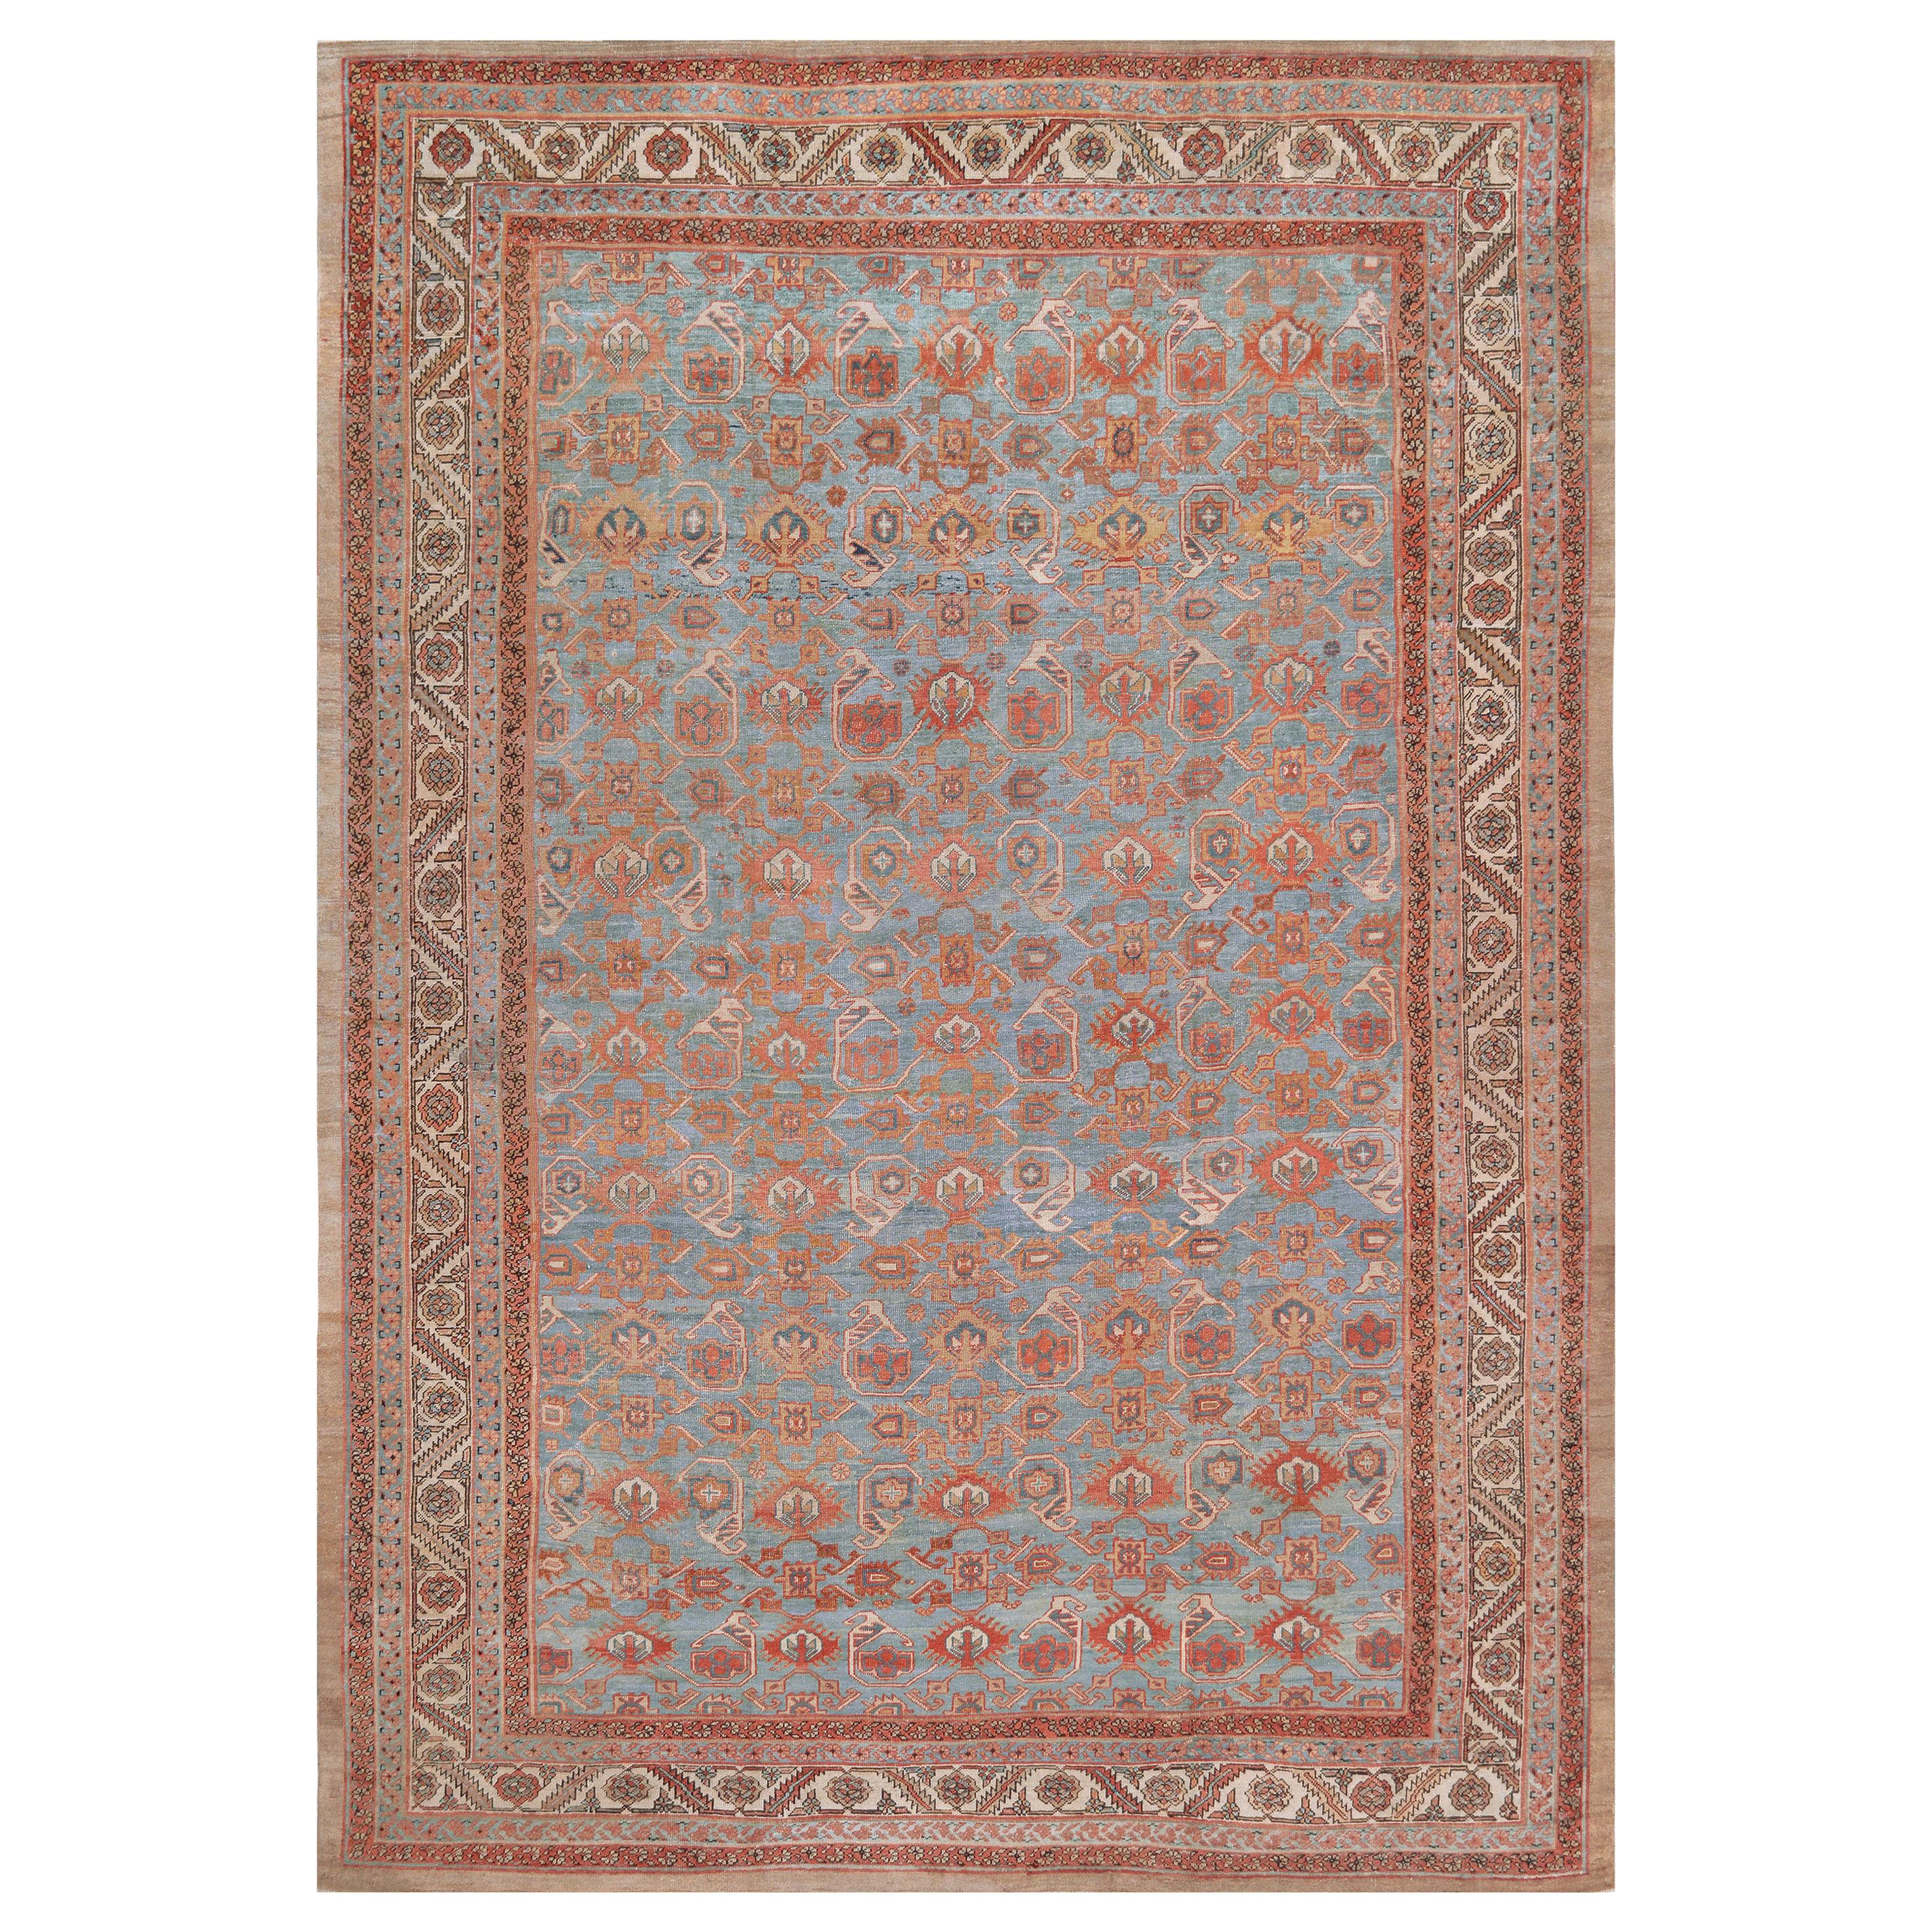 Late 19th Century Hand-Woven Bakhshaish Rug from North West Persia For Sale